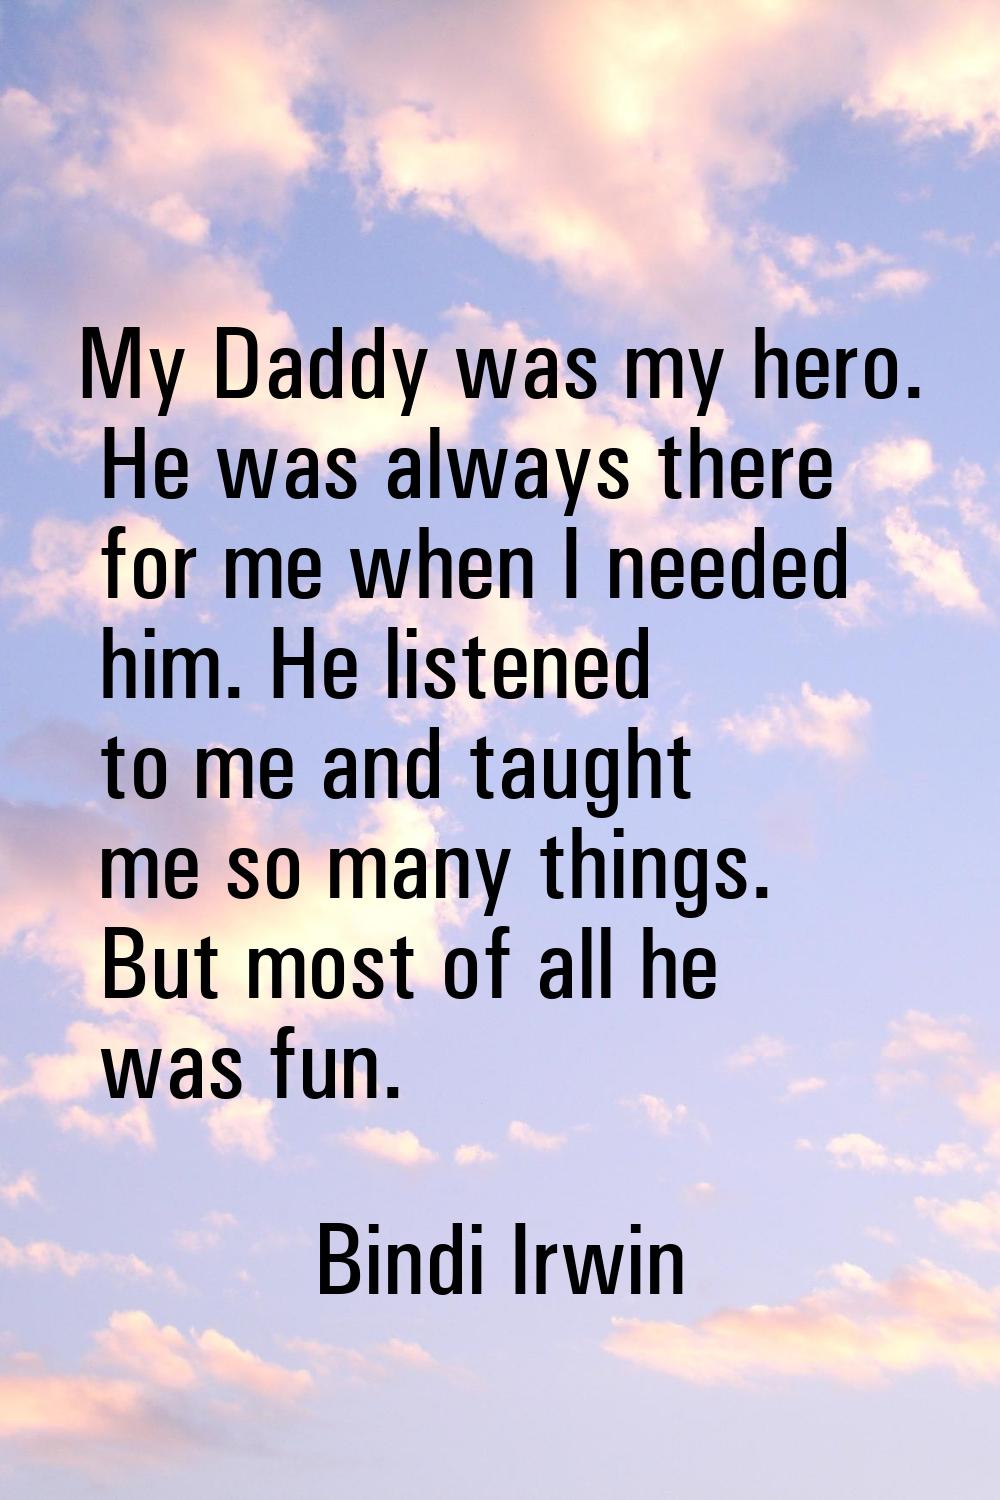 My Daddy was my hero. He was always there for me when I needed him. He listened to me and taught me